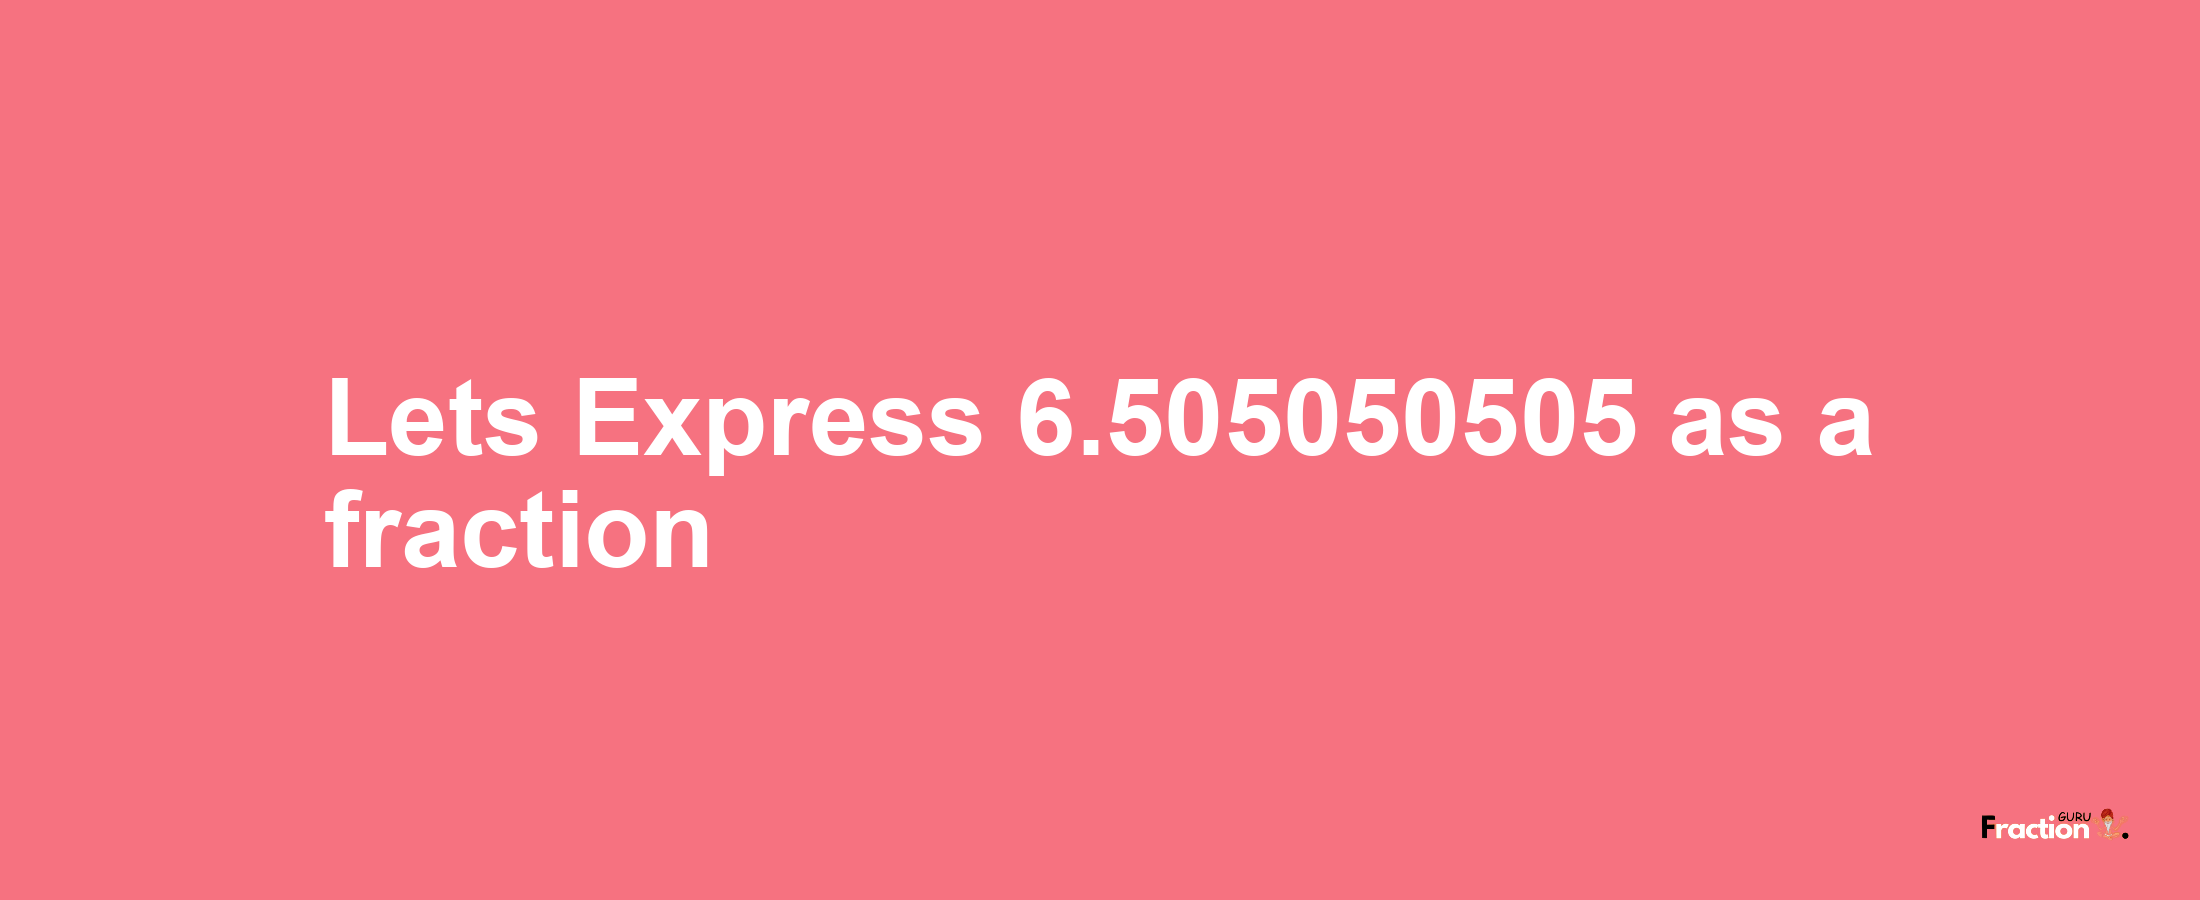 Lets Express 6.505050505 as afraction